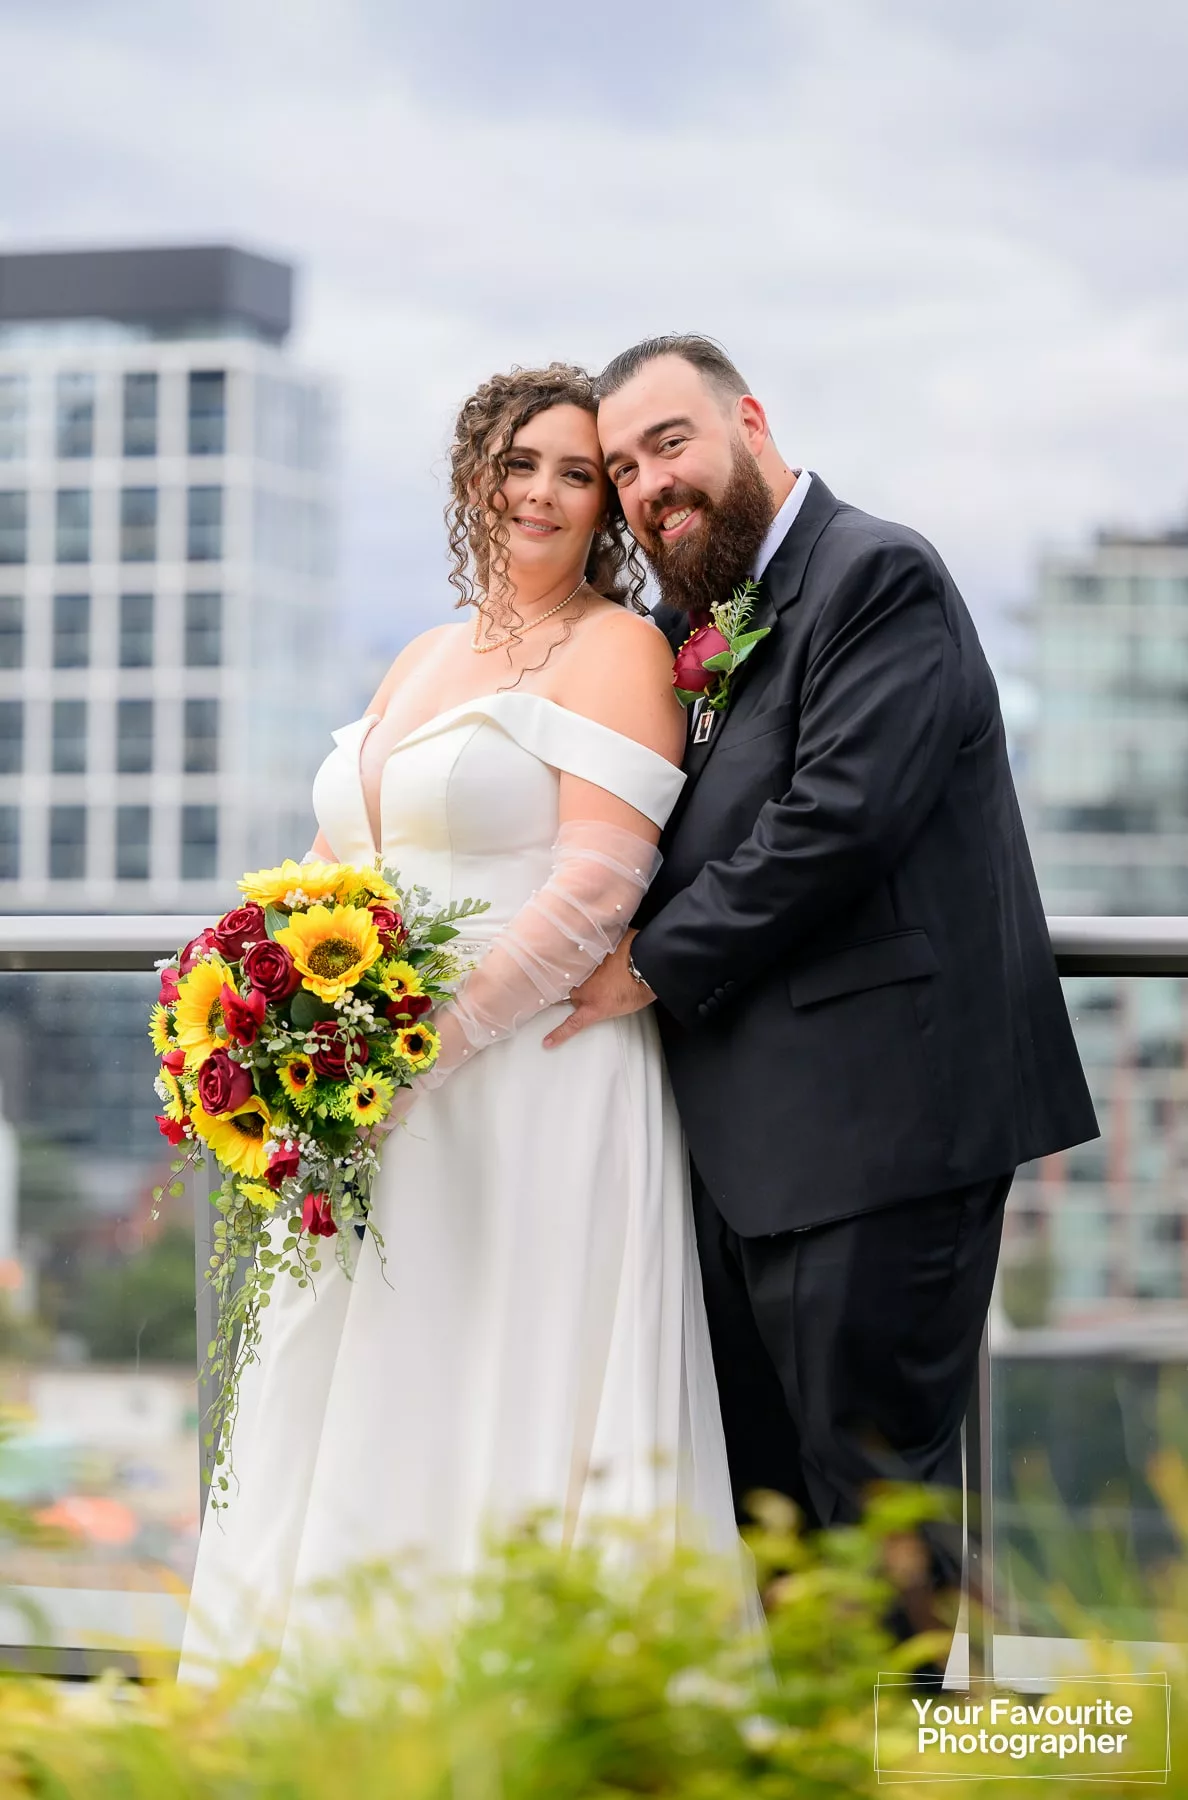 Bride and groom pose on a rooftop patio with a cityscape in the background and a garden in the foreground